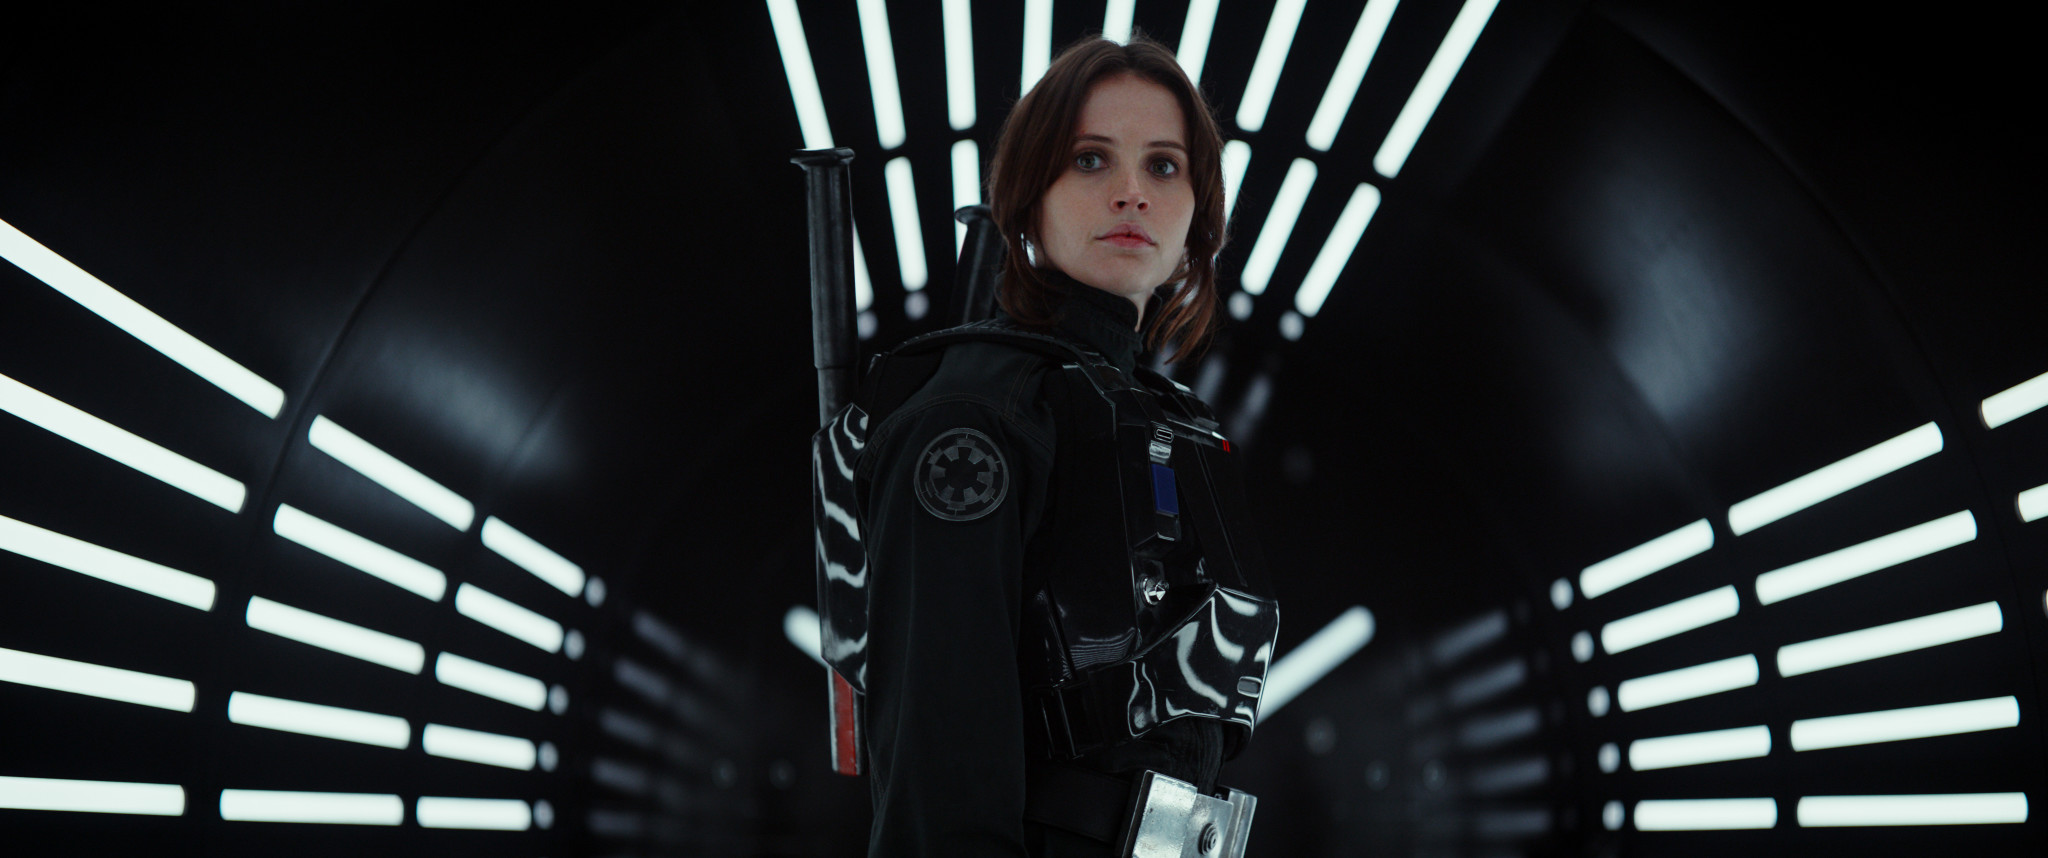 New Rogue One Trailer and Live Streams from Star Wars Celebration Begin July 15th